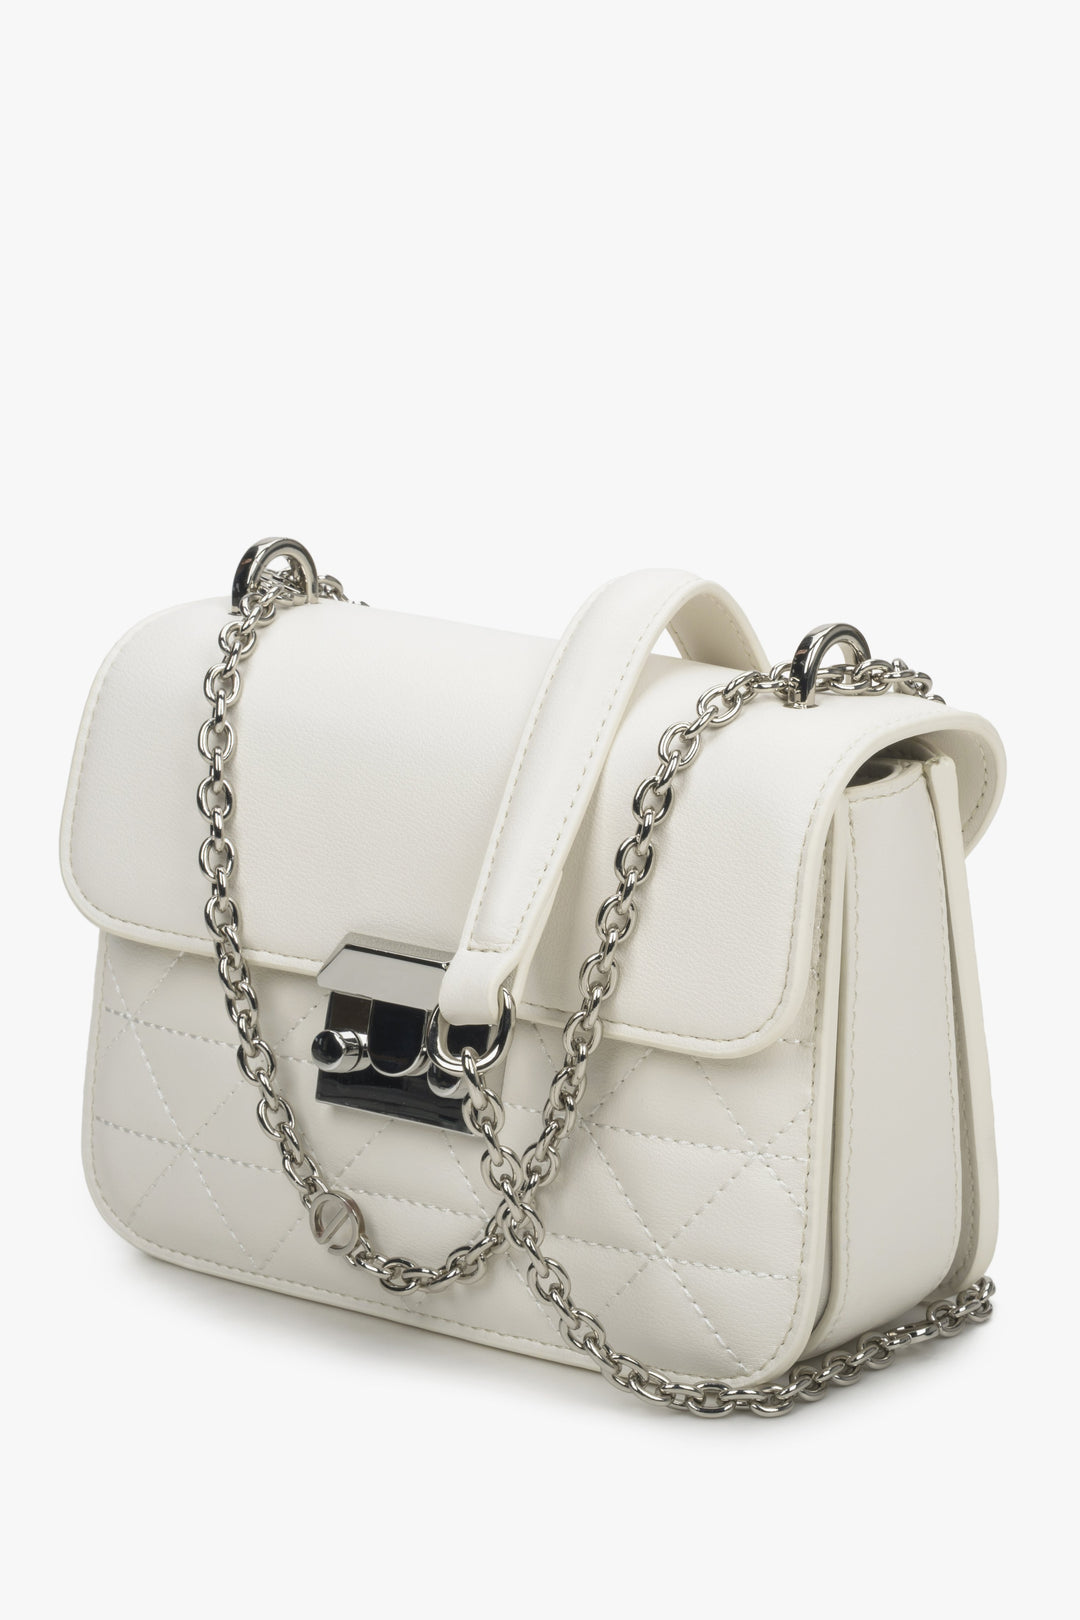 Estro white leather shoulder bag with silver accents.